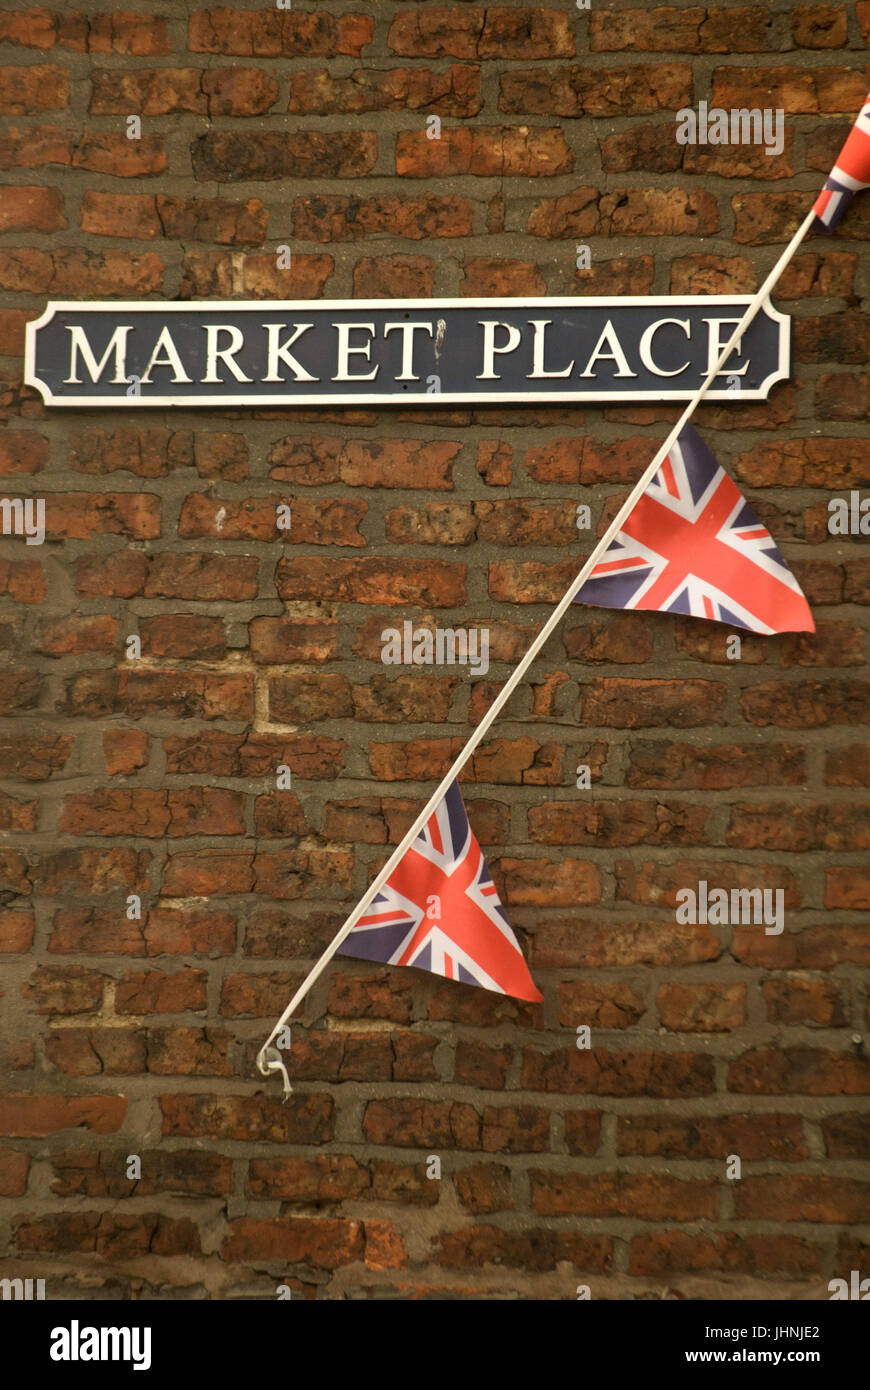 Market Place street sign, Morpeth, Northumberland Stock Photo